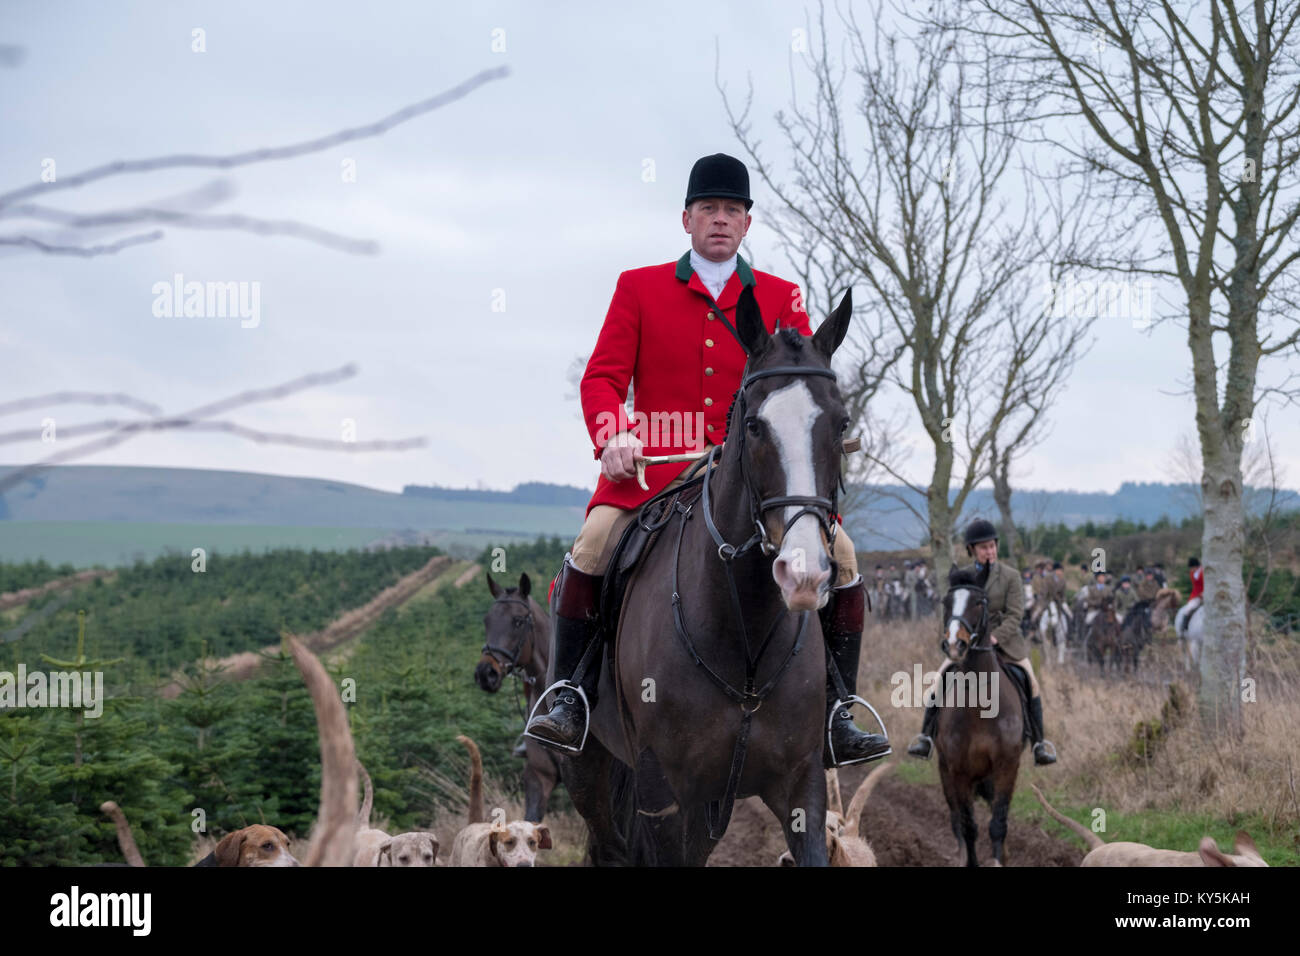 Ancrum, Rawflat /, UK. 13th January, 2018. Buccleuch Foxhounds at Rawflat, near Ancrum Caption: Huntsman Tim Allen (2014 - )(front red jacket) with the Duke of Buccleuch's Hunt Foxhounds on Saturday 13th January in the hills near to Ancrum, Jedburgh, a turnout of around 60 mounted supporters falling the days hunt. ( Credit: Rob Gray/Alamy Live News Stock Photo